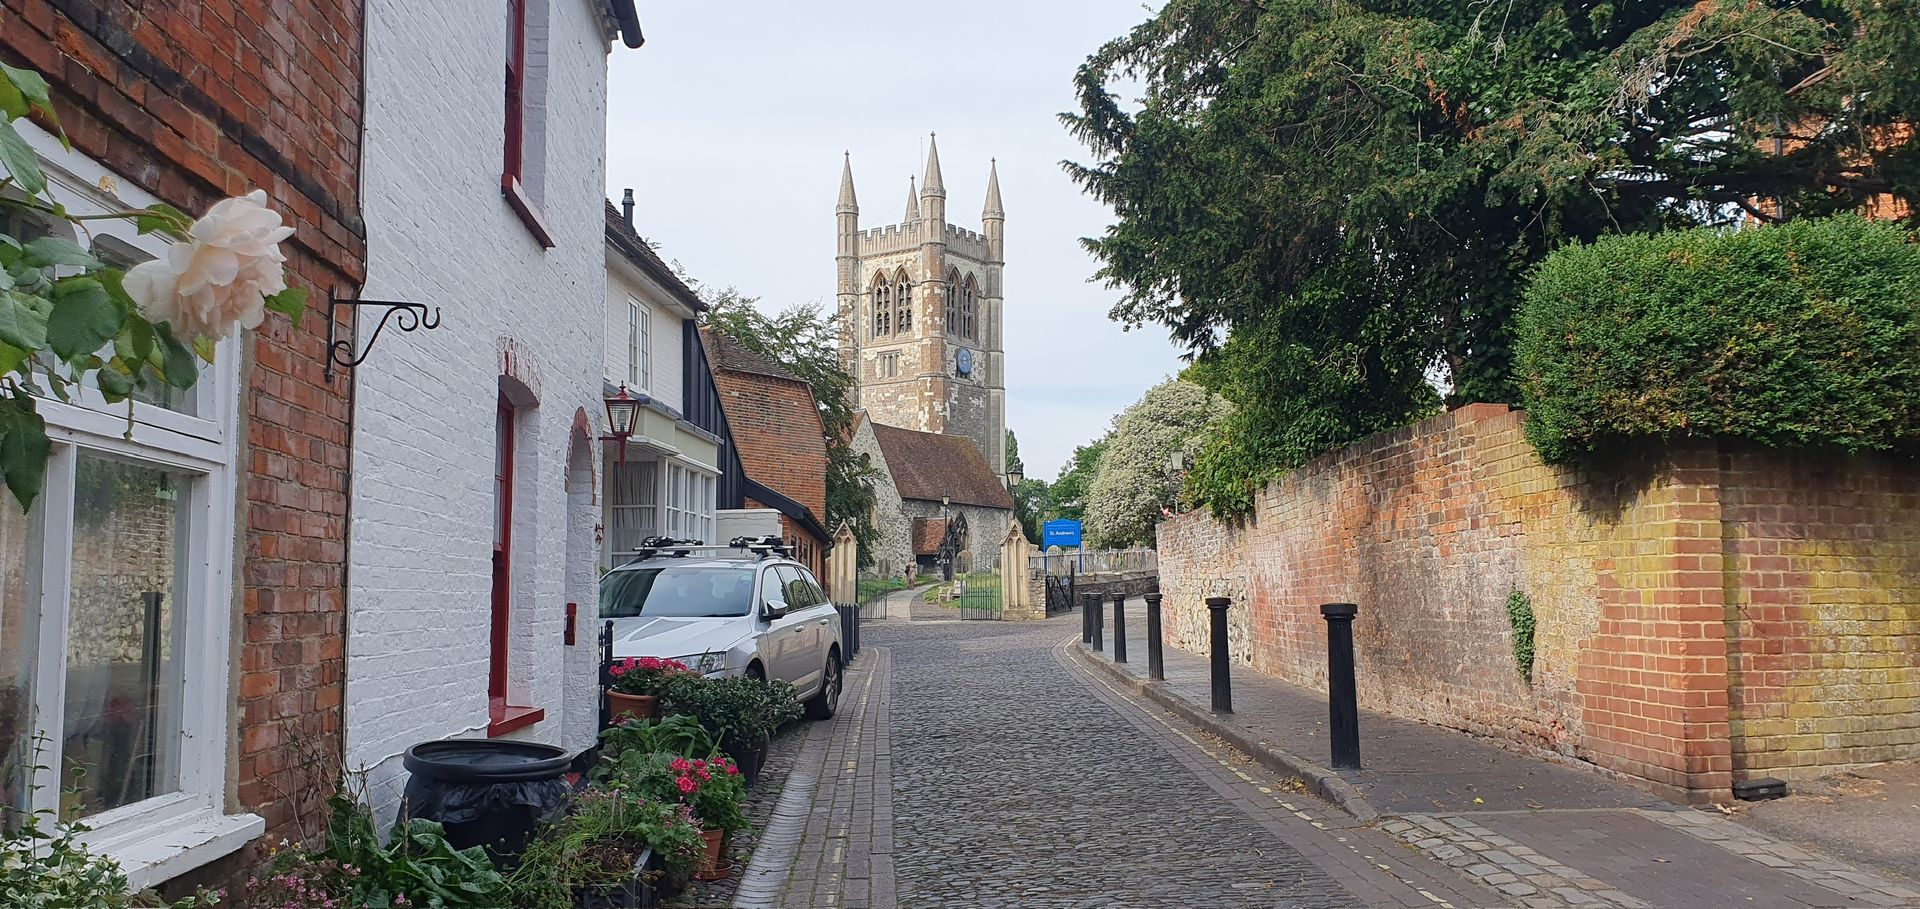 Why base your business in Farnham